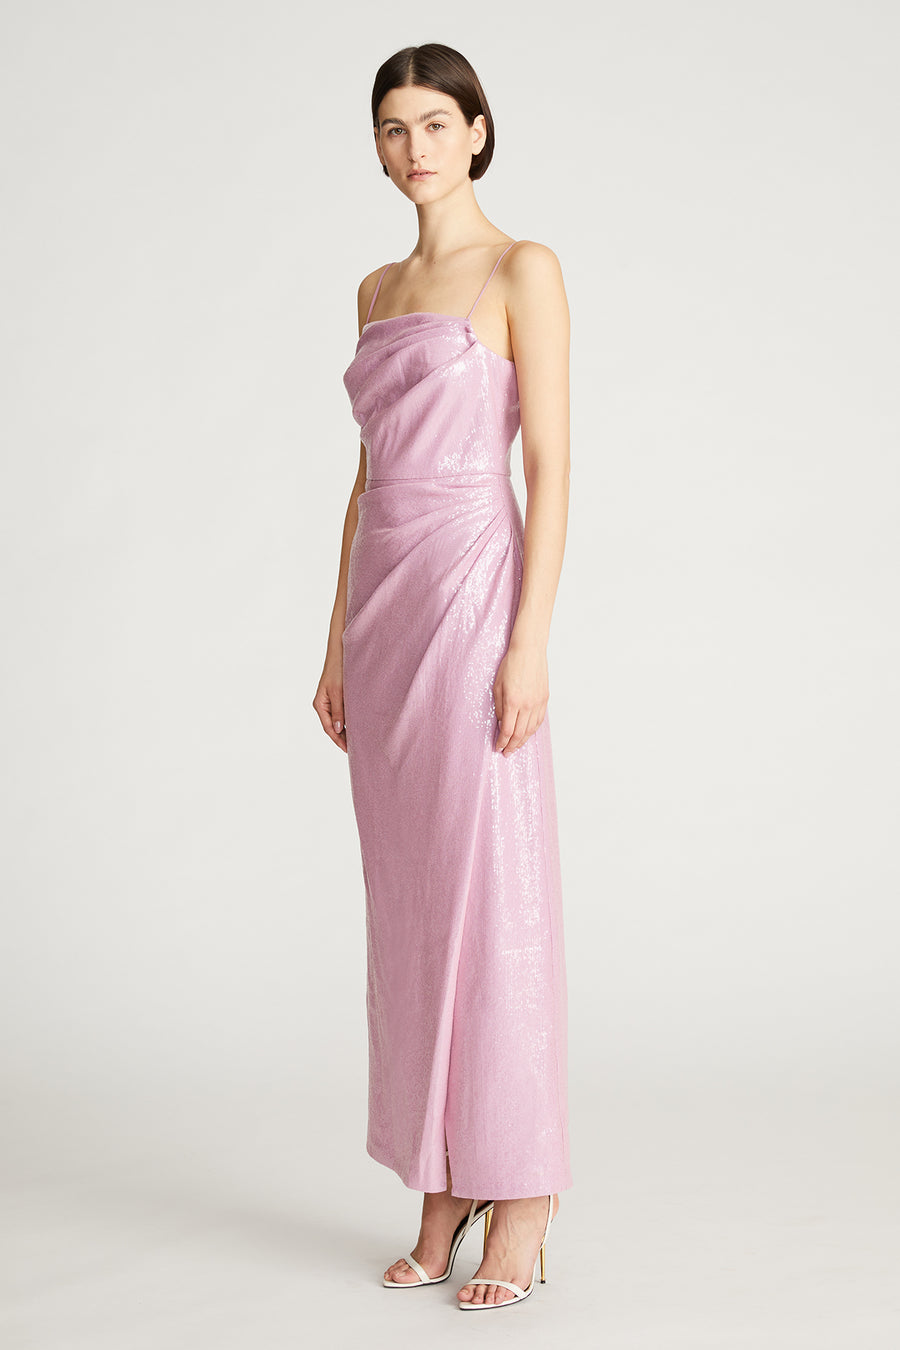 Alania Gown in Stretch Sequin